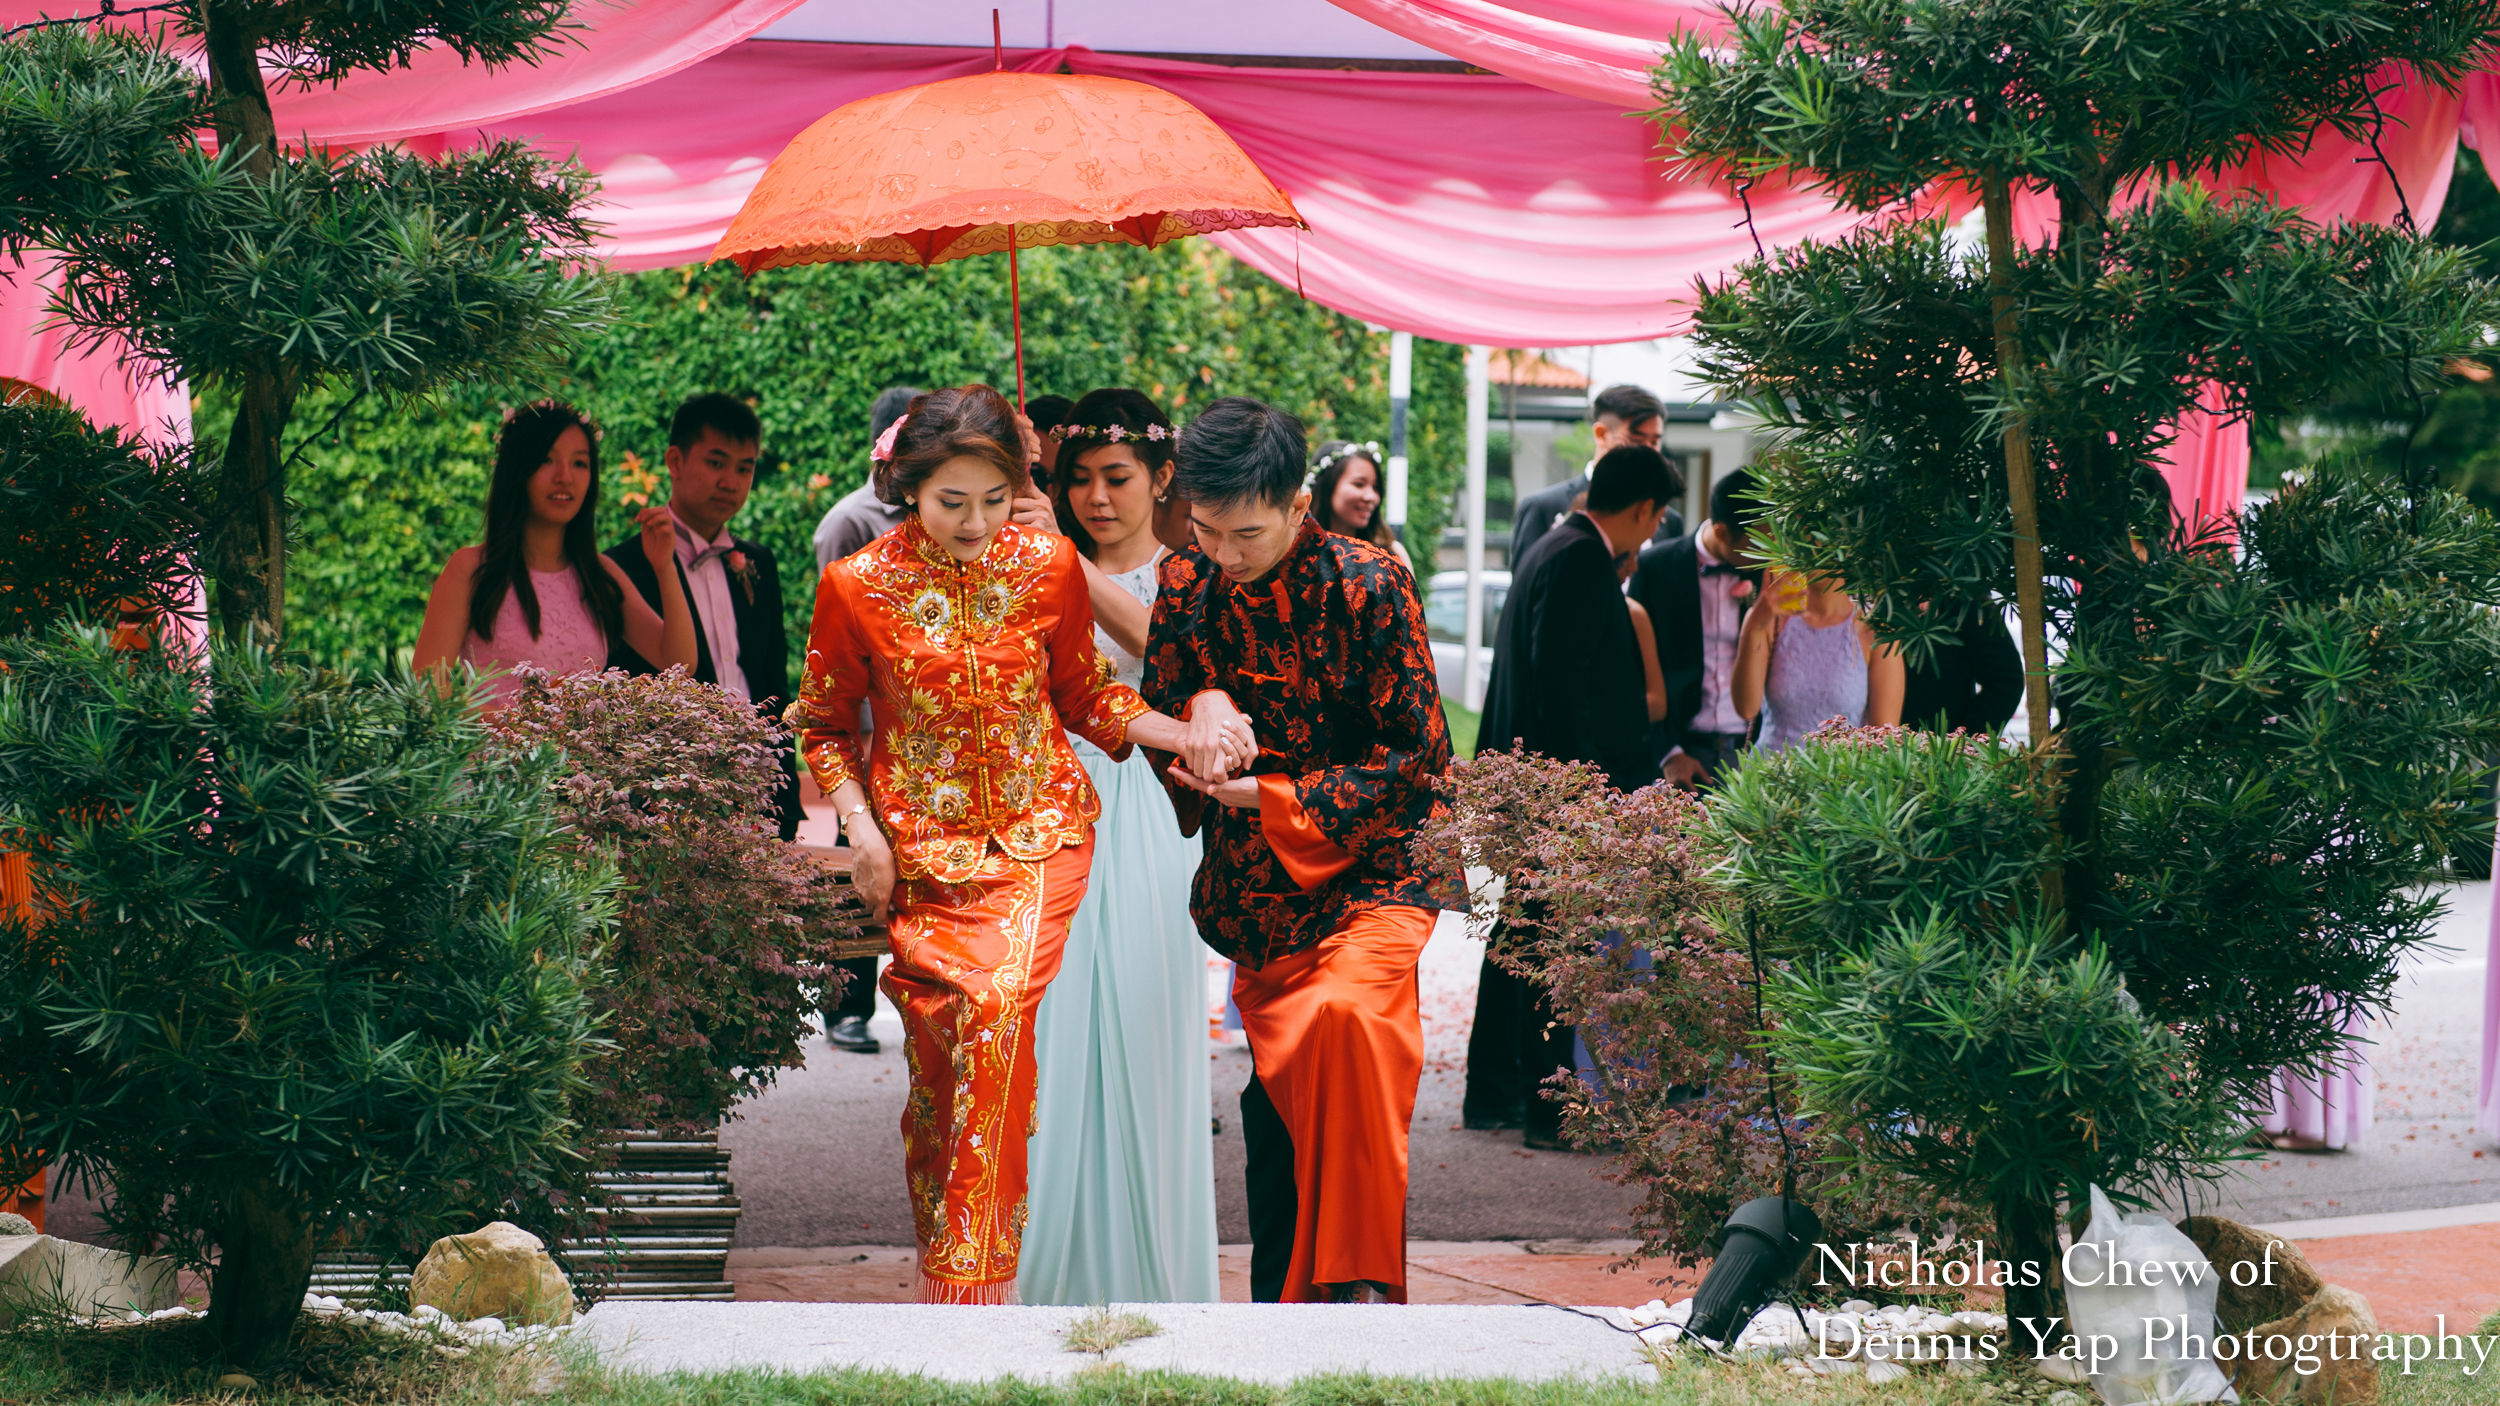 Nicholas Chew profile wedding natural candid moments chinese traditional church garden of dennis yap photography008Nicholas Profile-8.jpg